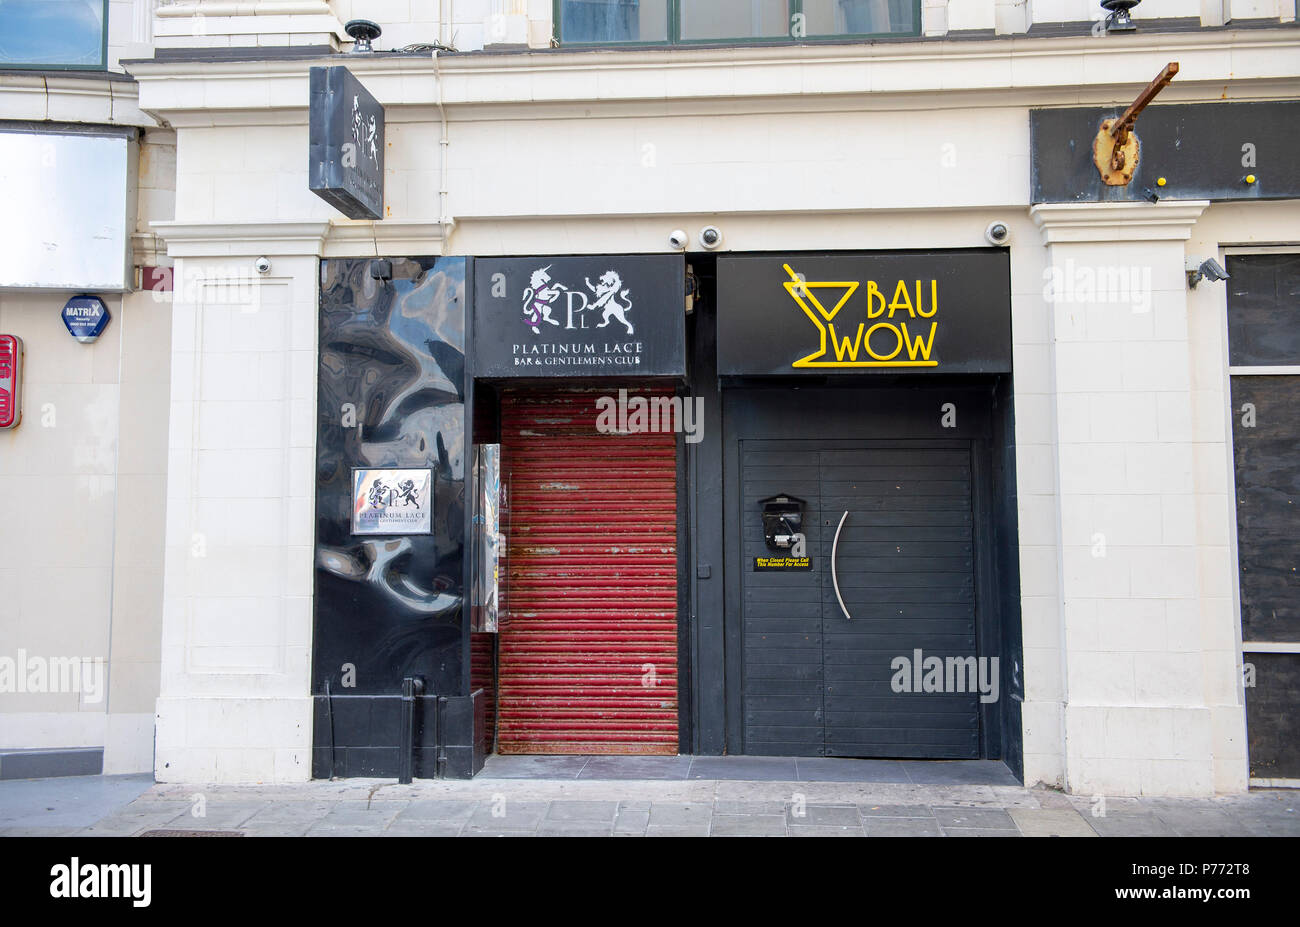 Bau Wow and Platinum Lace bar and gentleman club with lap dancing in East Street Brighton UK Stock Photo